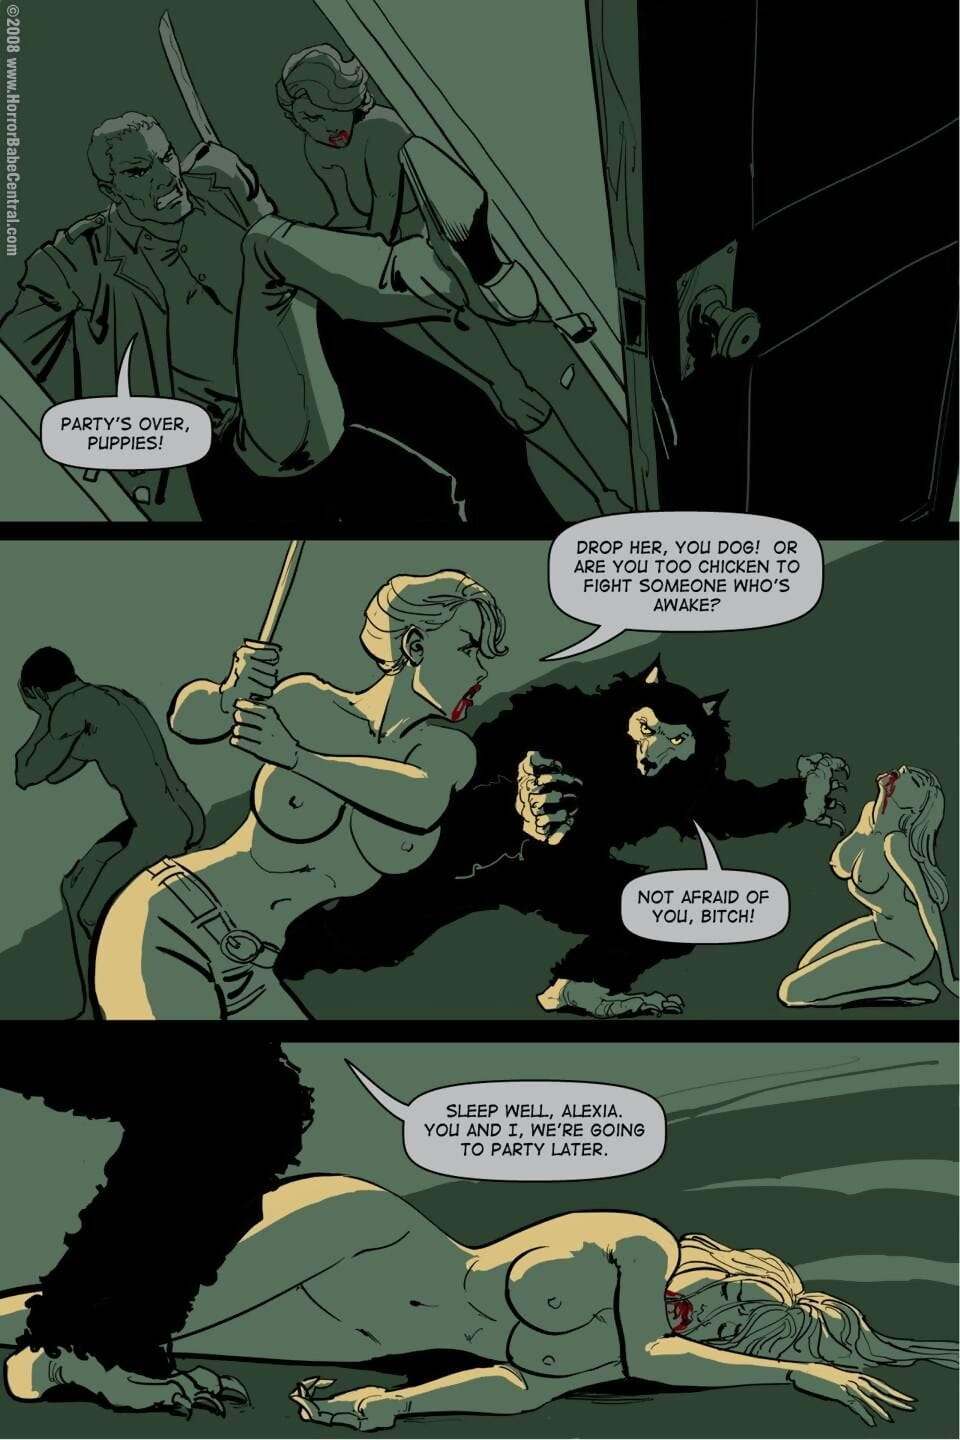 Vampire City - part 4 page 1